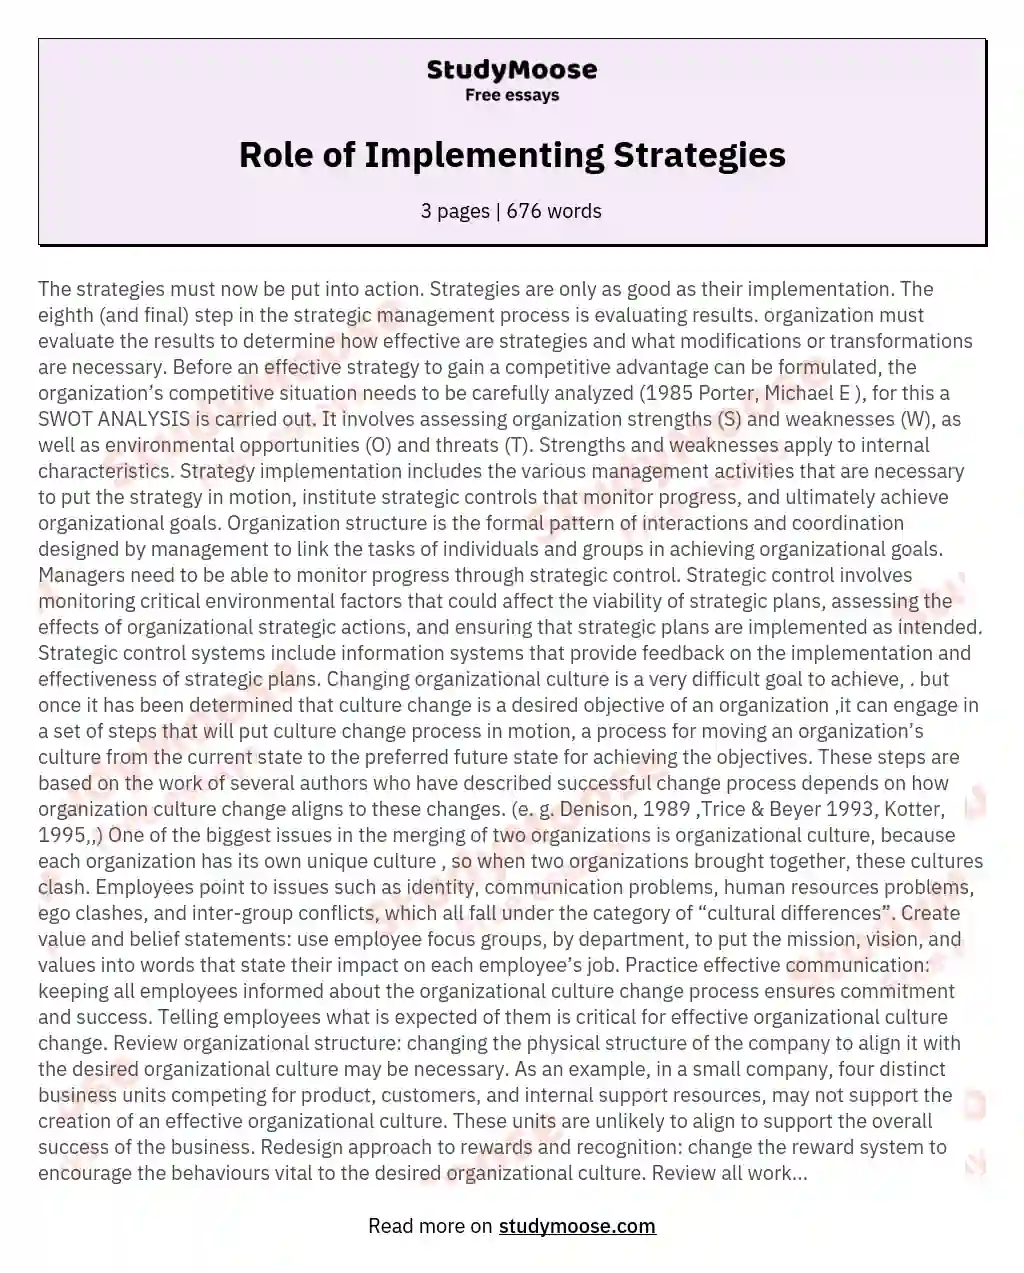 Role of Implementing Strategies essay